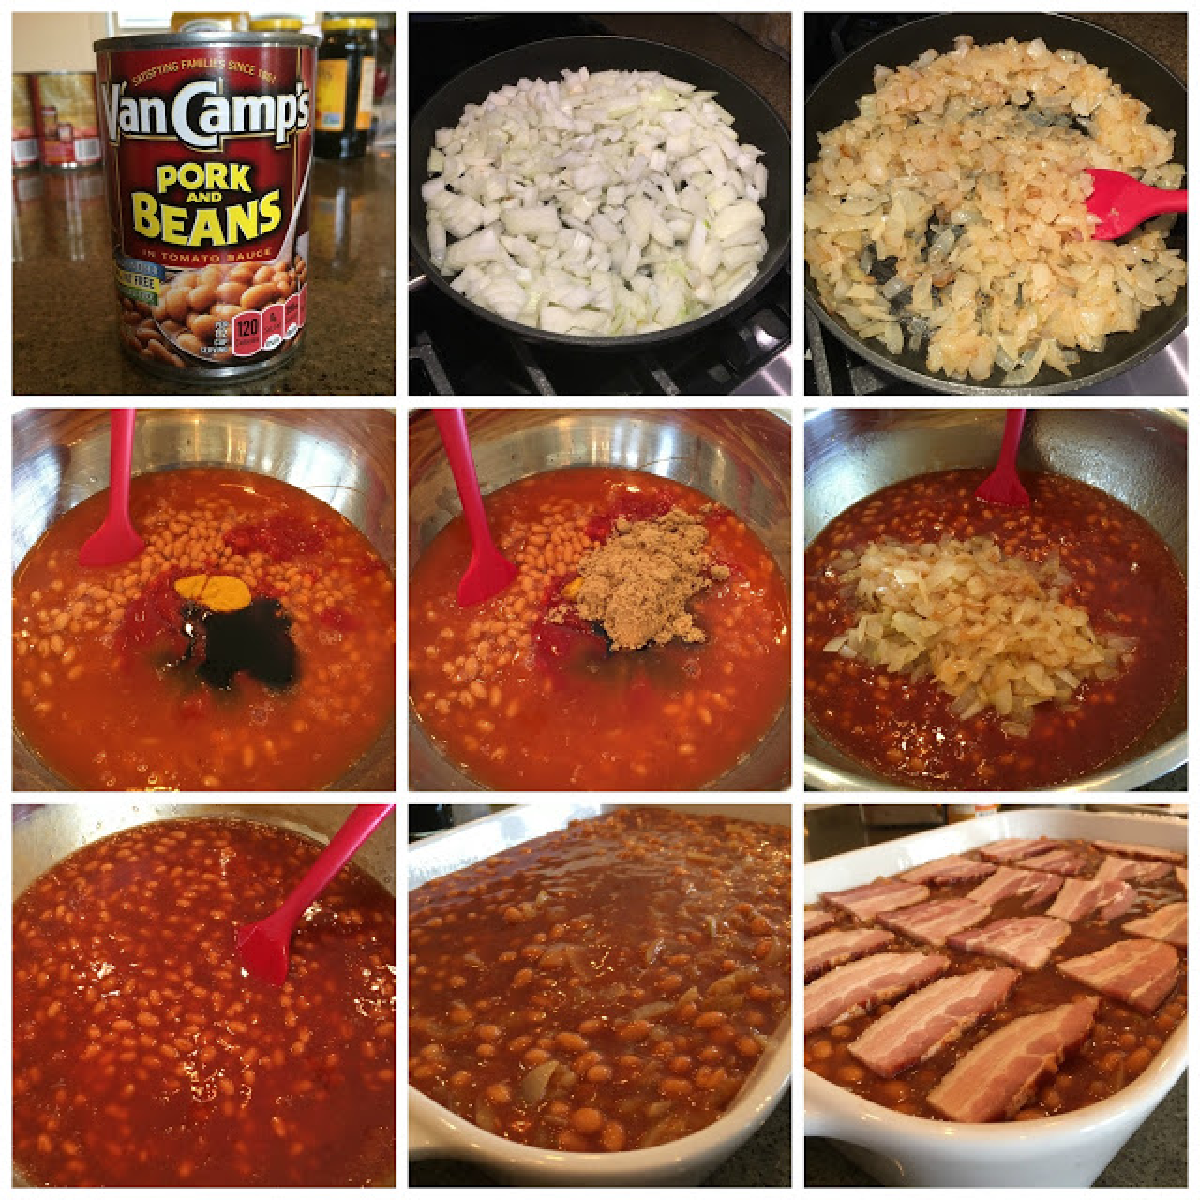 Collage showing 9 photos of the recipe being made.